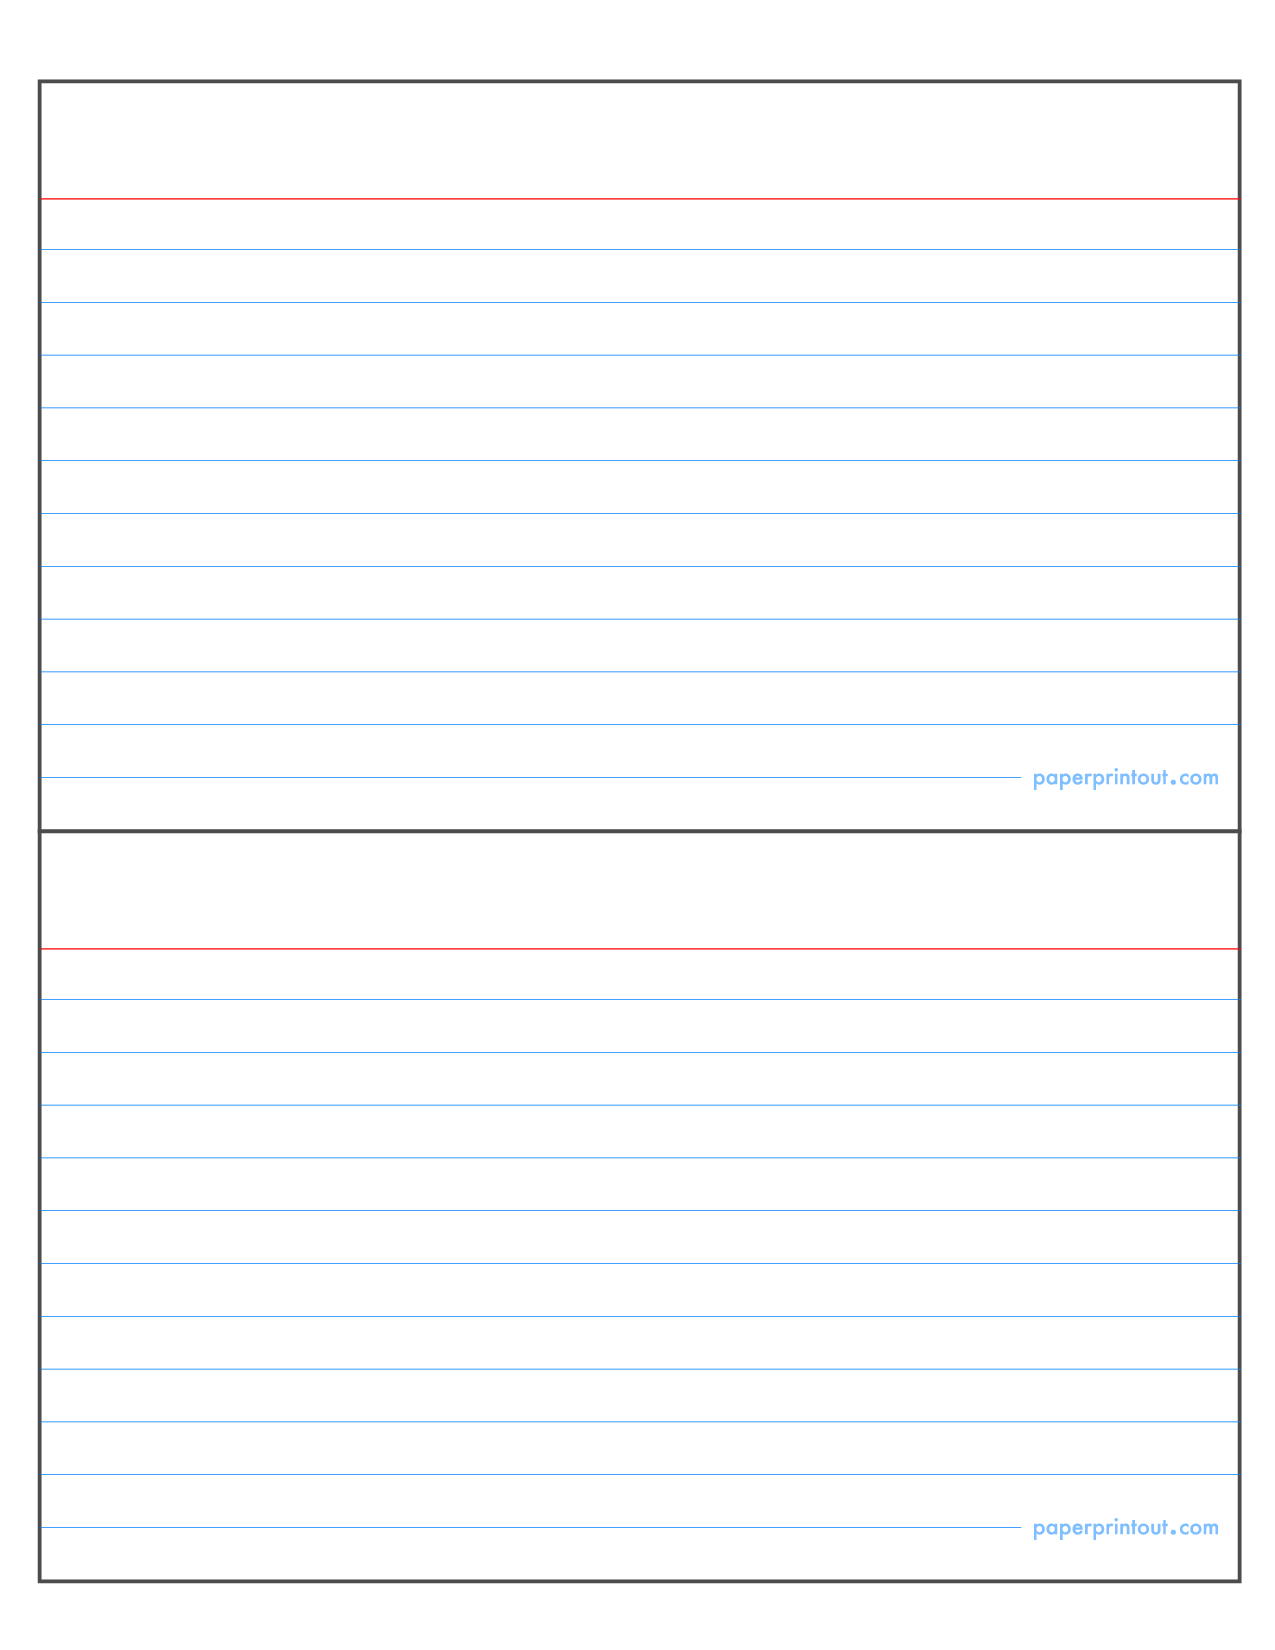 Index Card Template | E Commercewordpress For Index Card Template For Word